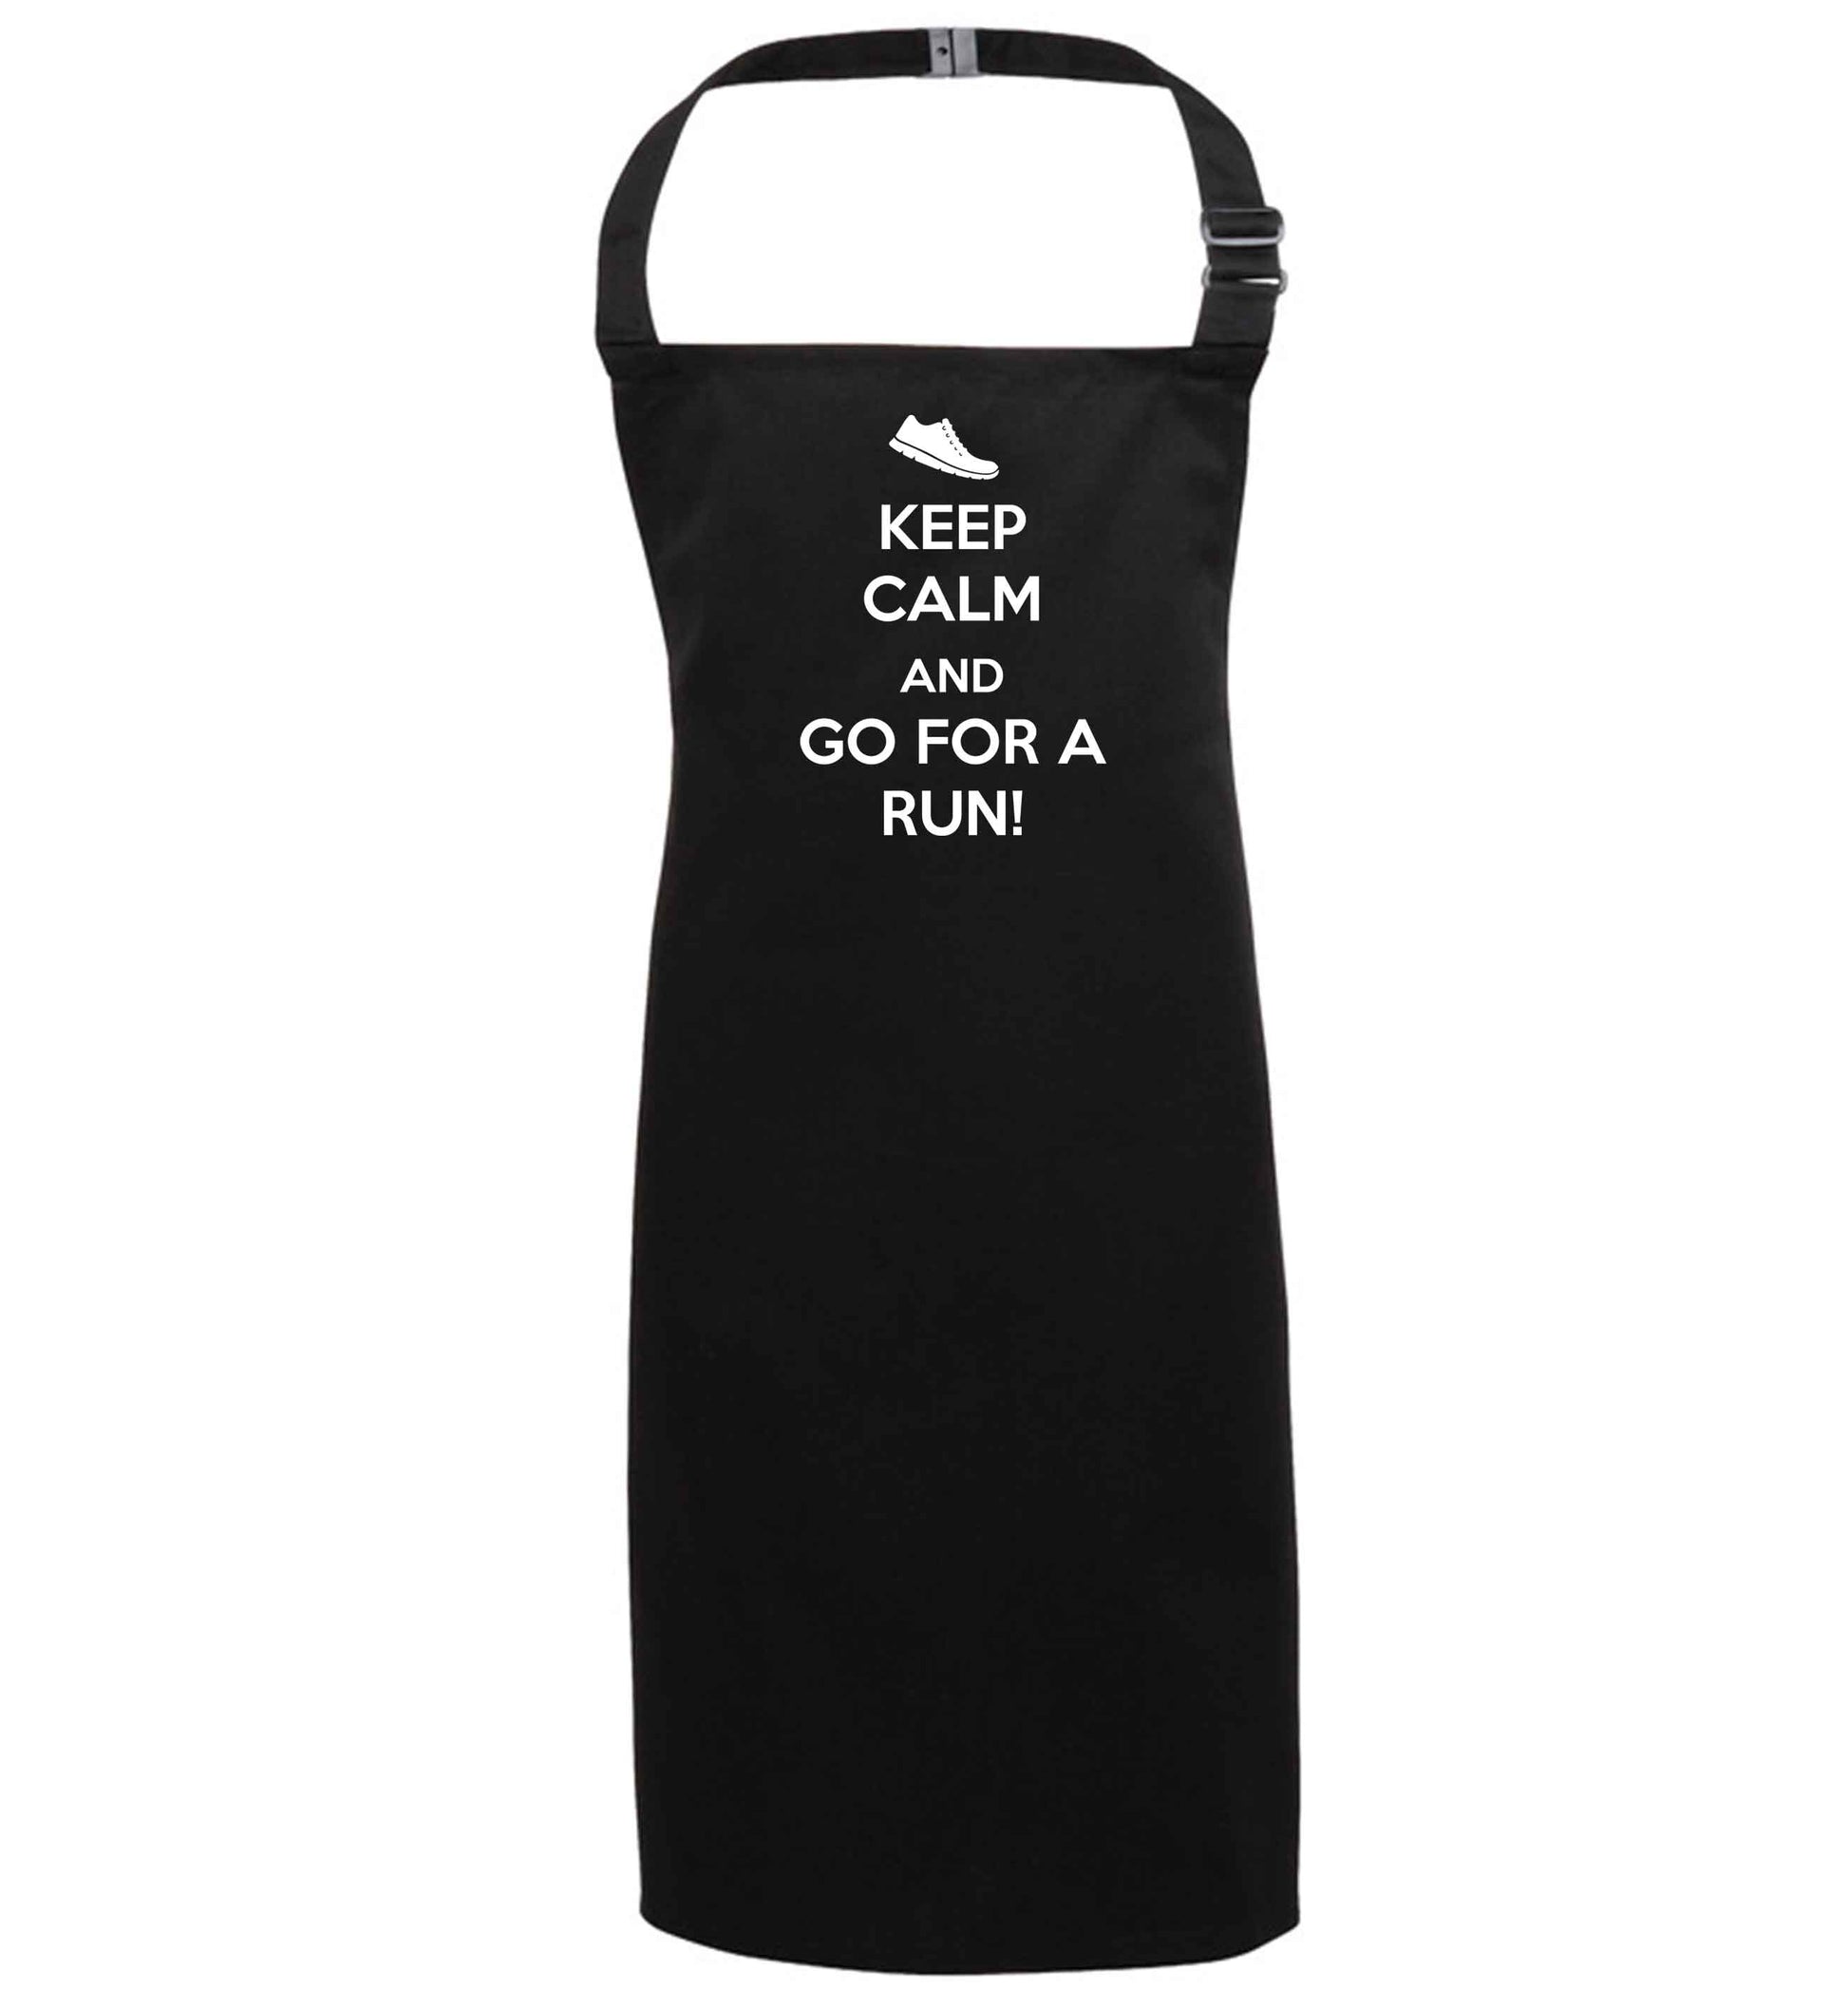 Keep calm and go for a run black apron 7-10 years